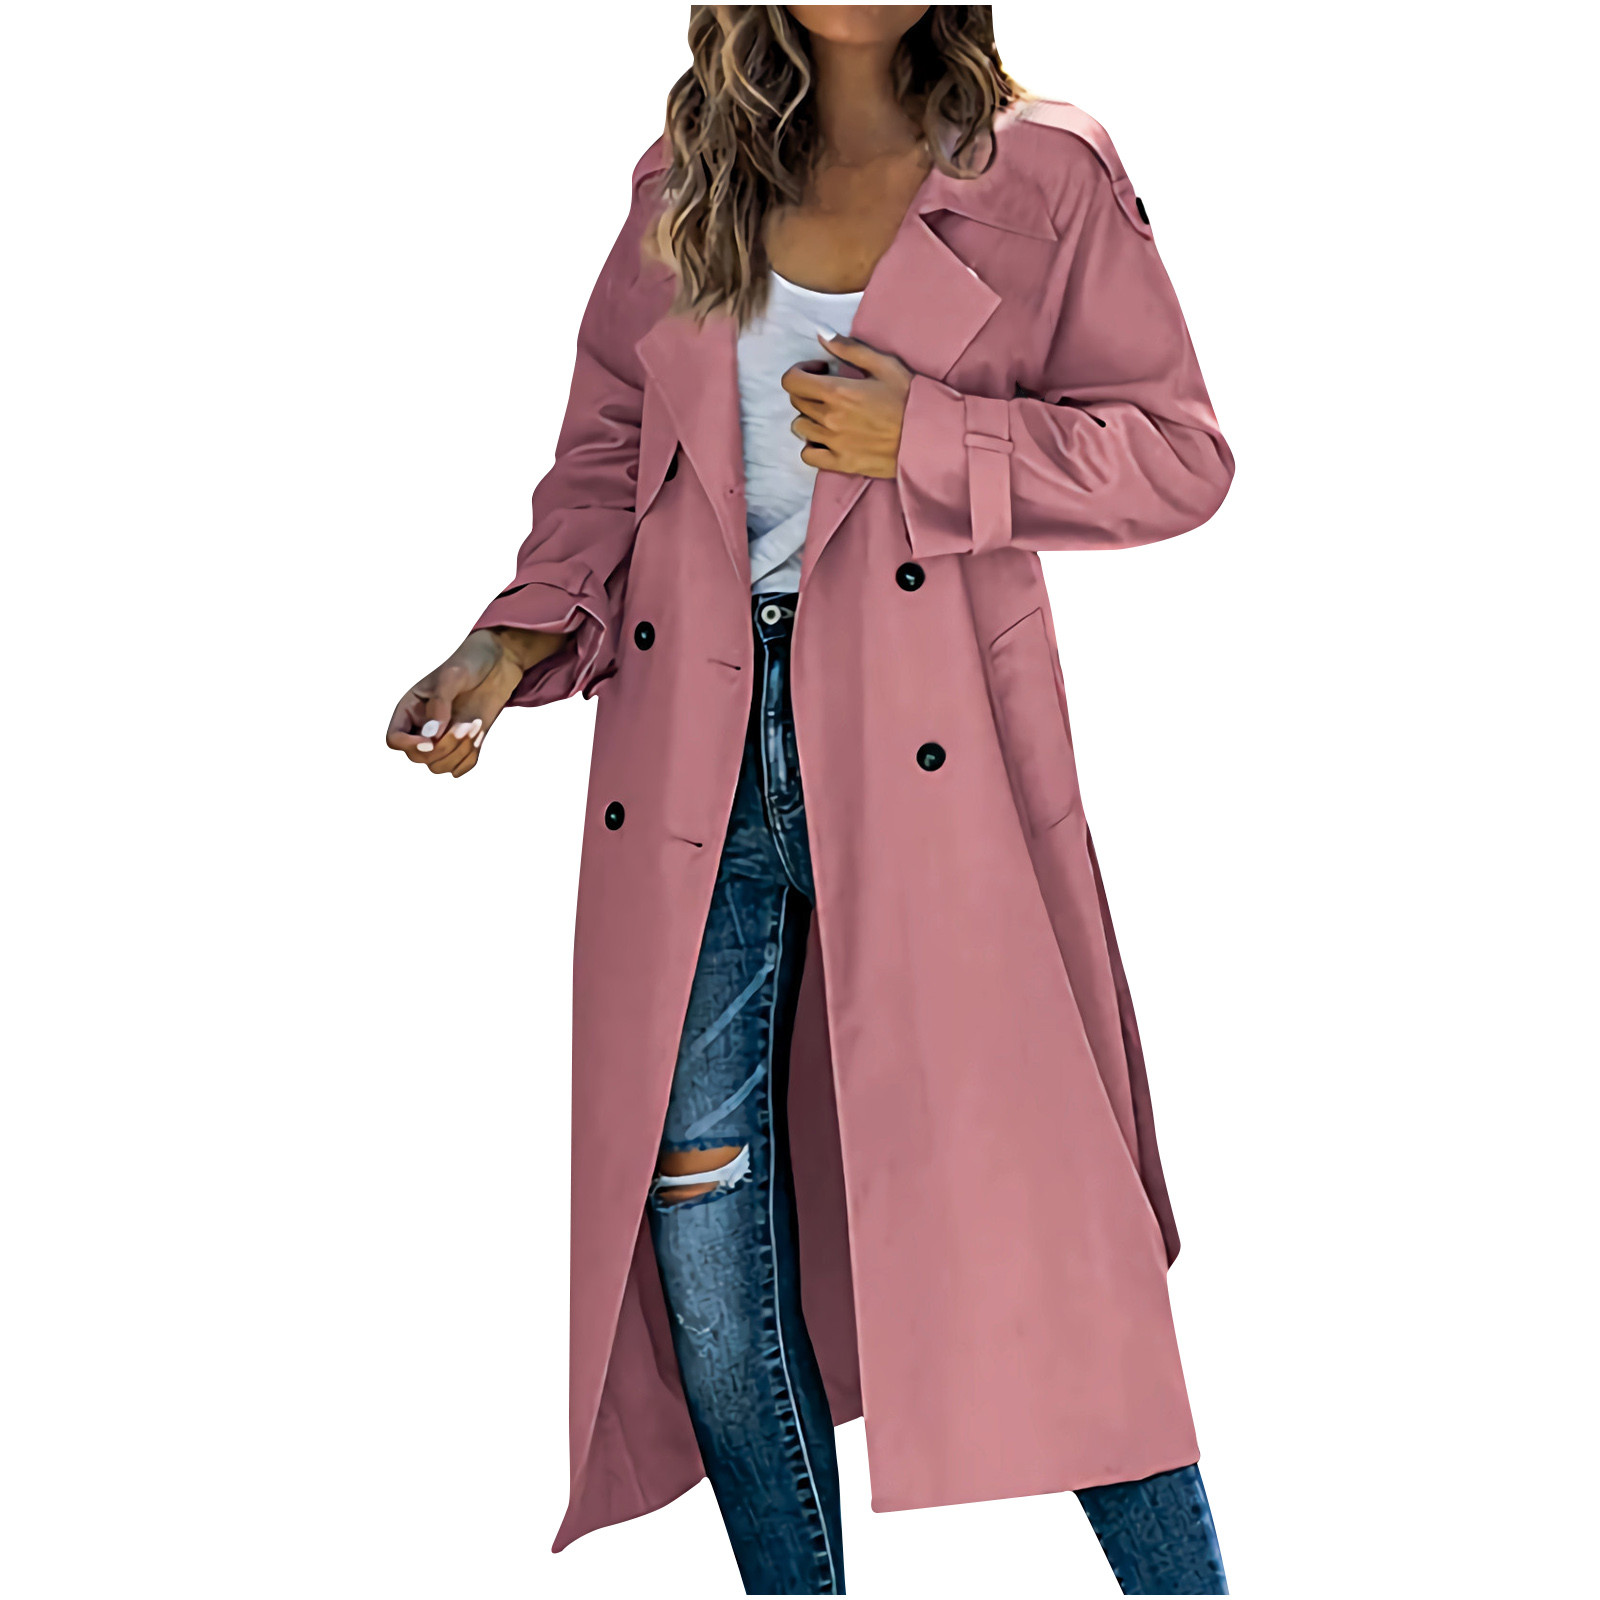 YFPWM Women Classic Double Breasted Coats Slim Long Jacket Winter Long Trench Coat Long Sleeve Double Breasted Coat Trench Coat Long Sleeve Coat Jacket Pink XL - image 1 of 7